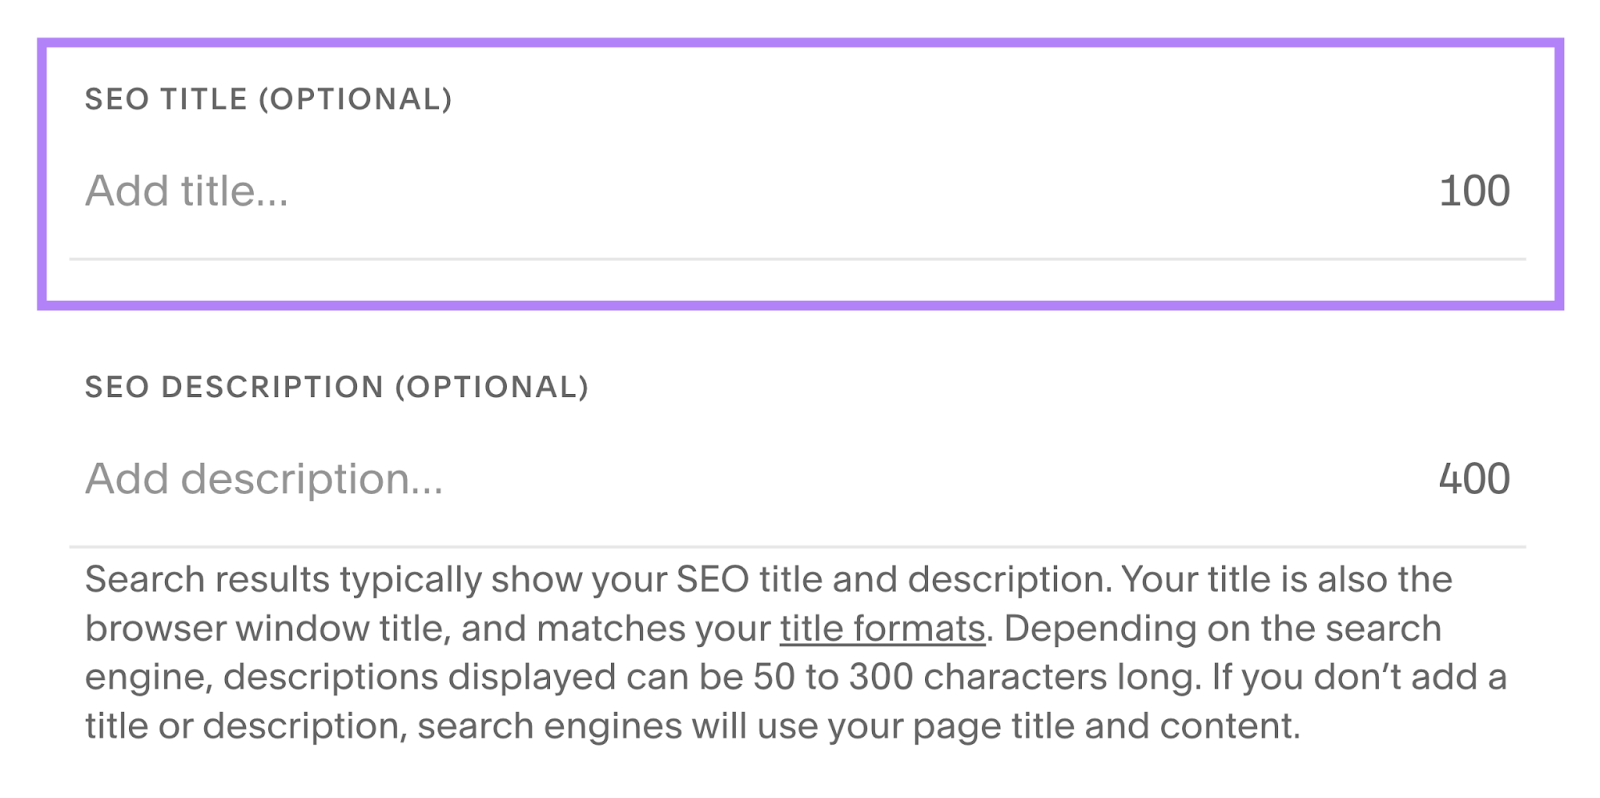 “SEO Title (Optional)” field highlighted